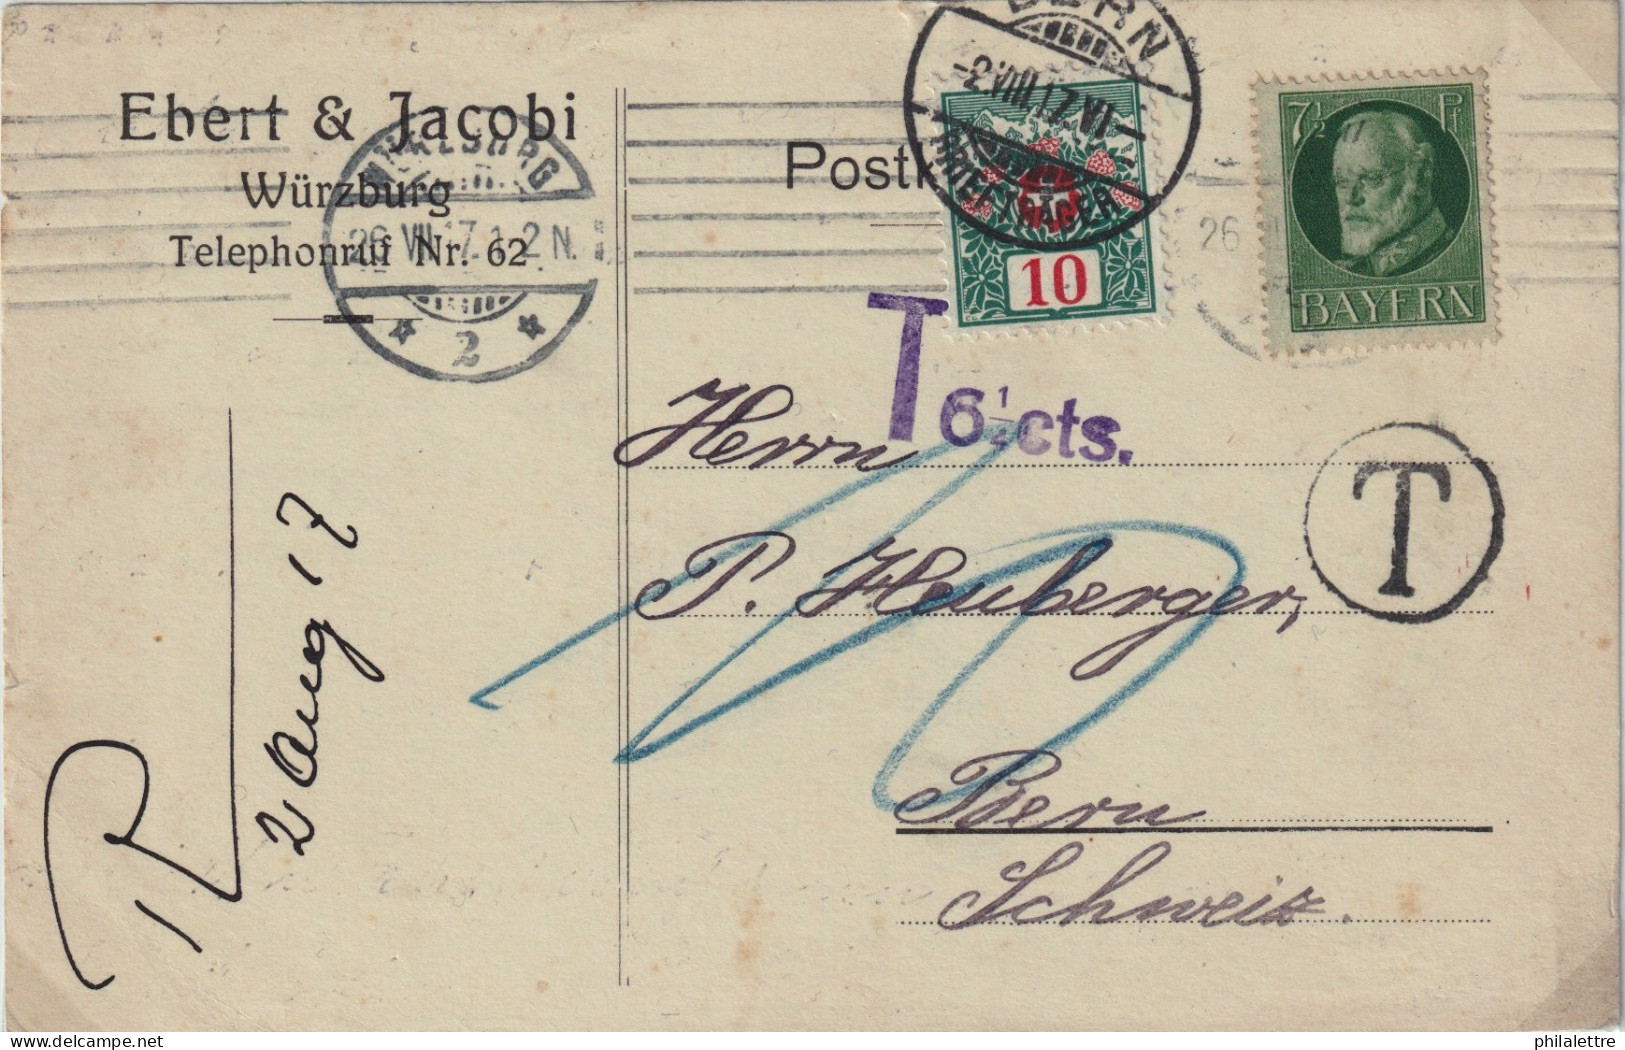 SUISSE / SWITZERLAND 1928 P. Due Mi.32 On PPC From BAVARIA Franked 7-1/2pf With "T 6-1/4cts" Postage Due Mark - Segnatasse